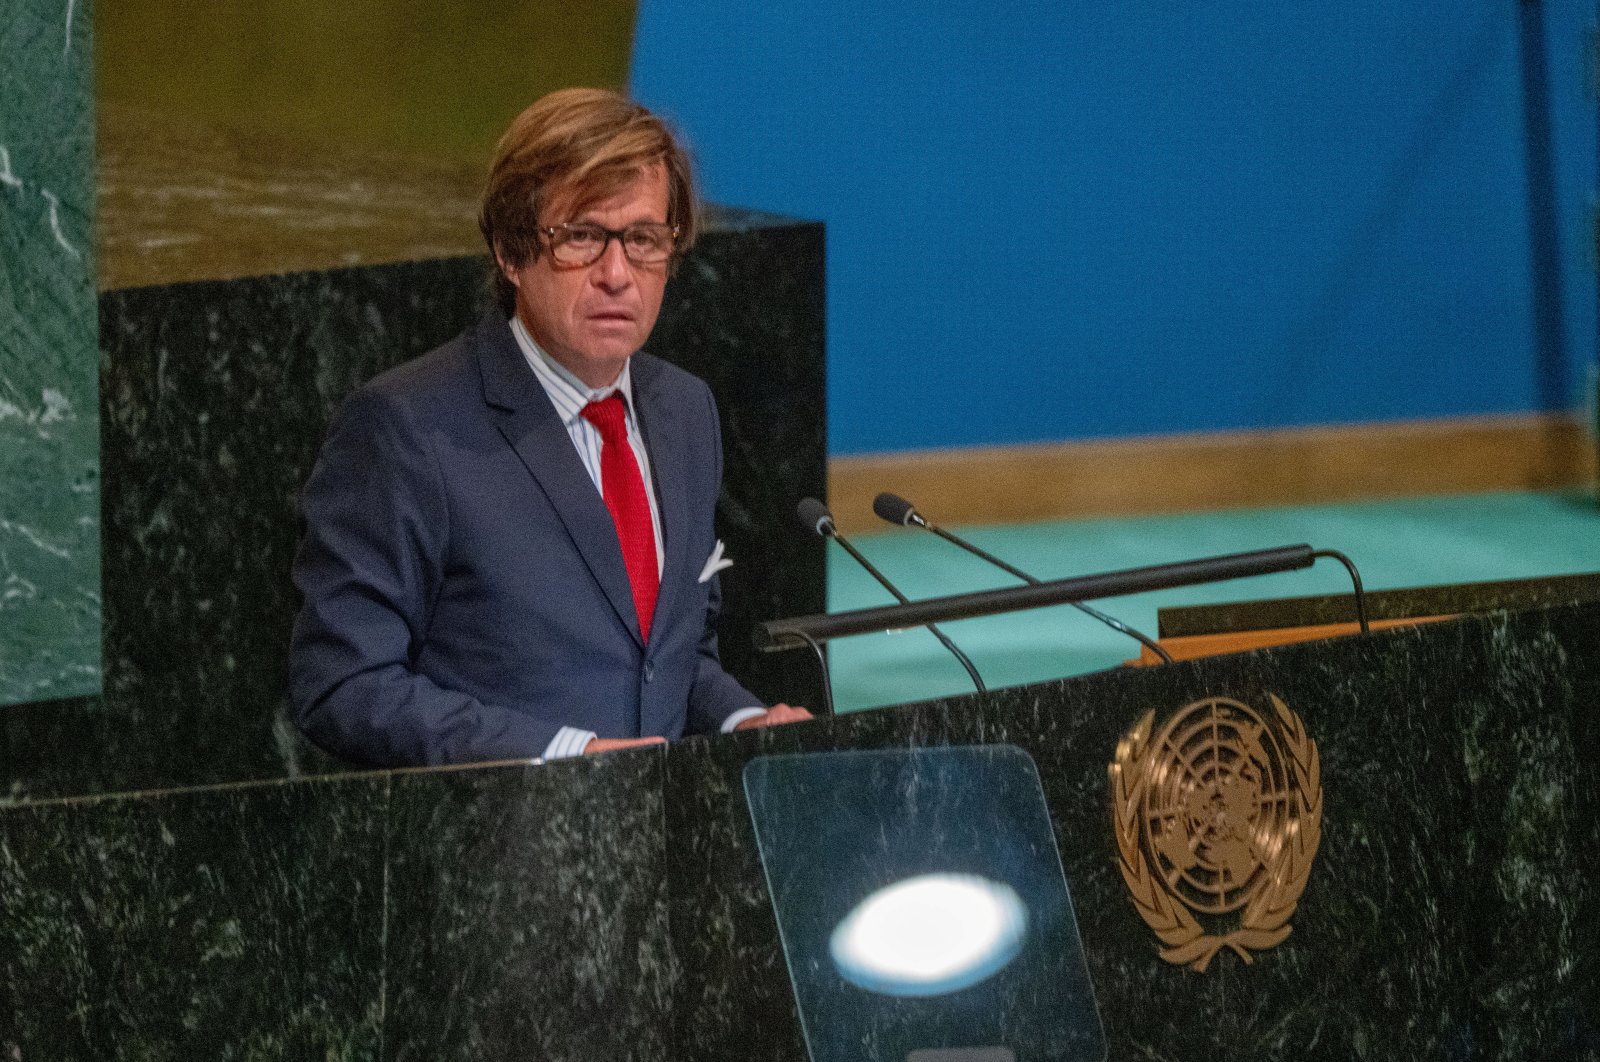 UNGA President Nicolas de Riviere addresses the general assembly prior to a vote on a resolution condemning the annexation of parts of Ukraine by Russia. New York City, New York, U.S., Oct. 12, 2022. (REUTERS Photo)